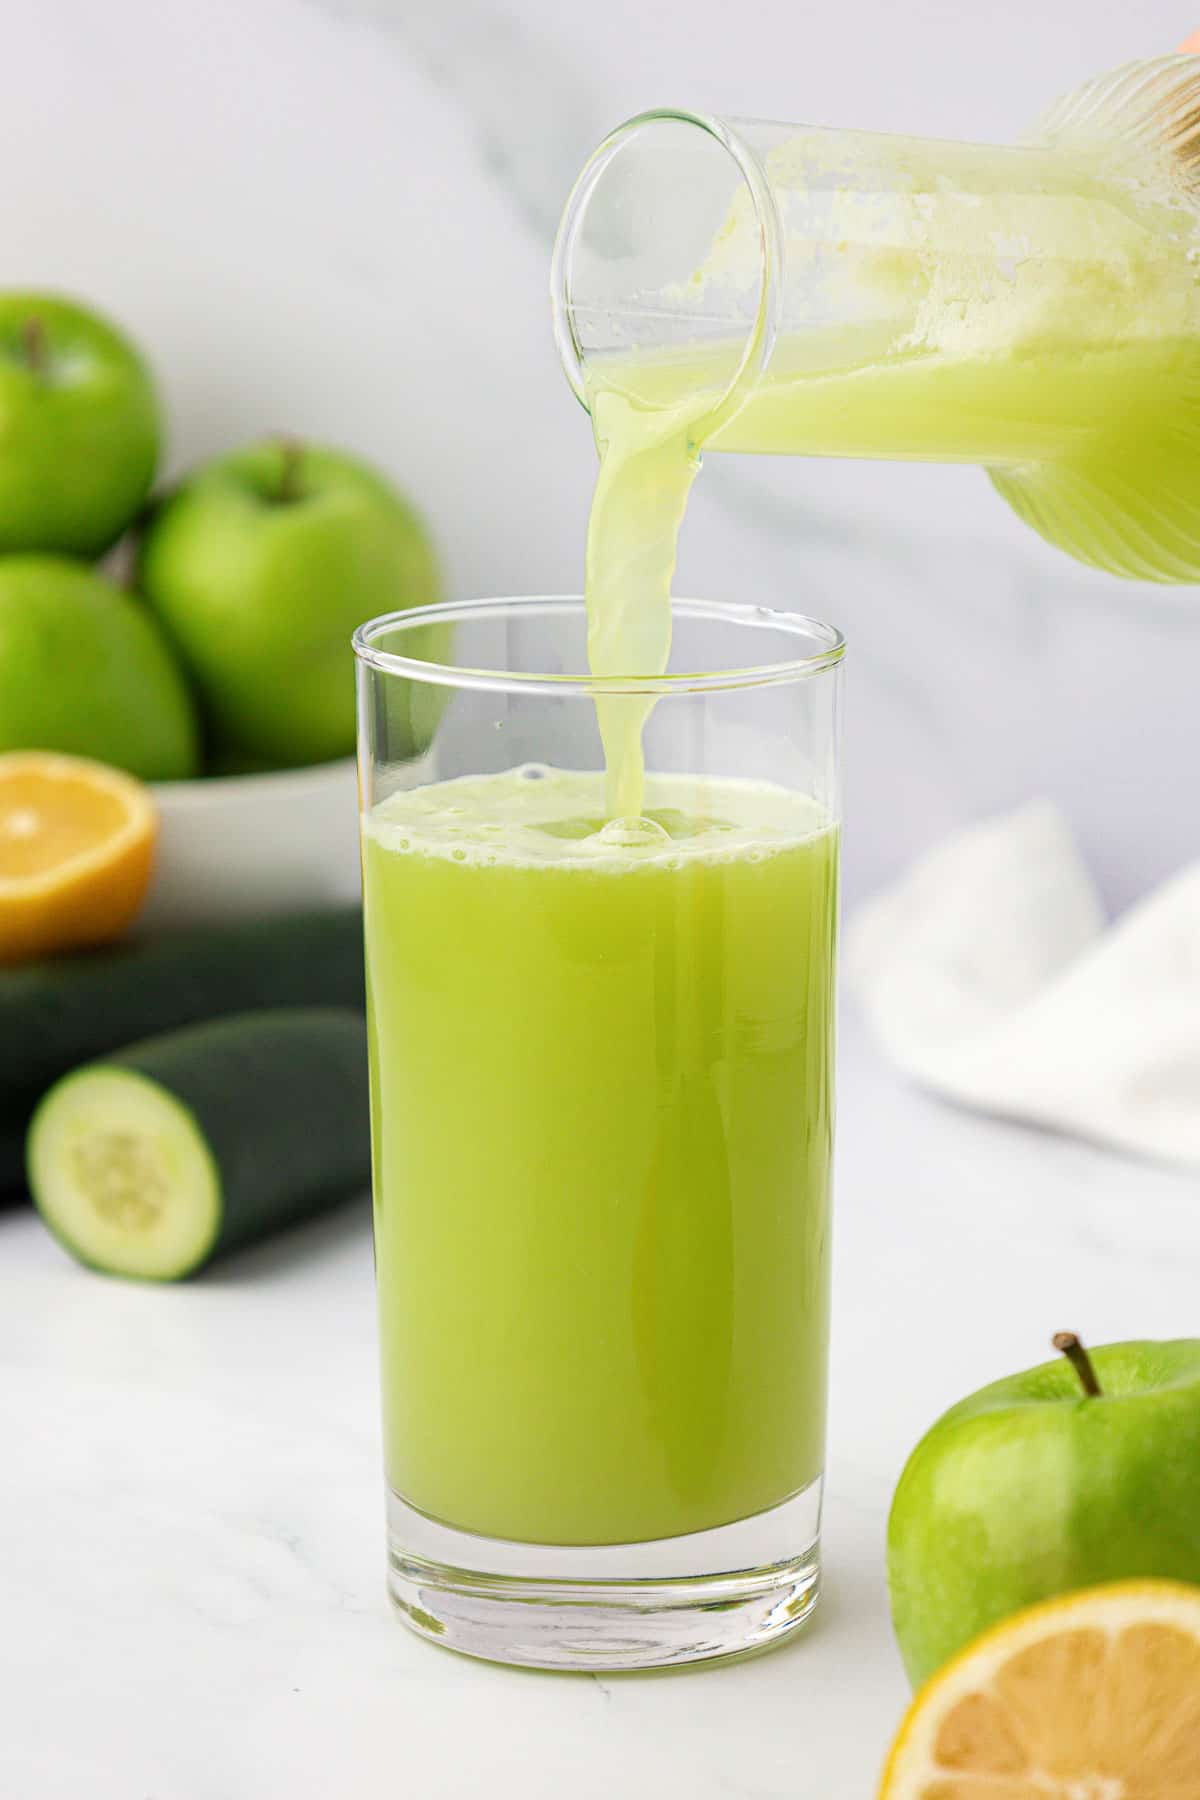 pouring green apple juice into a glass